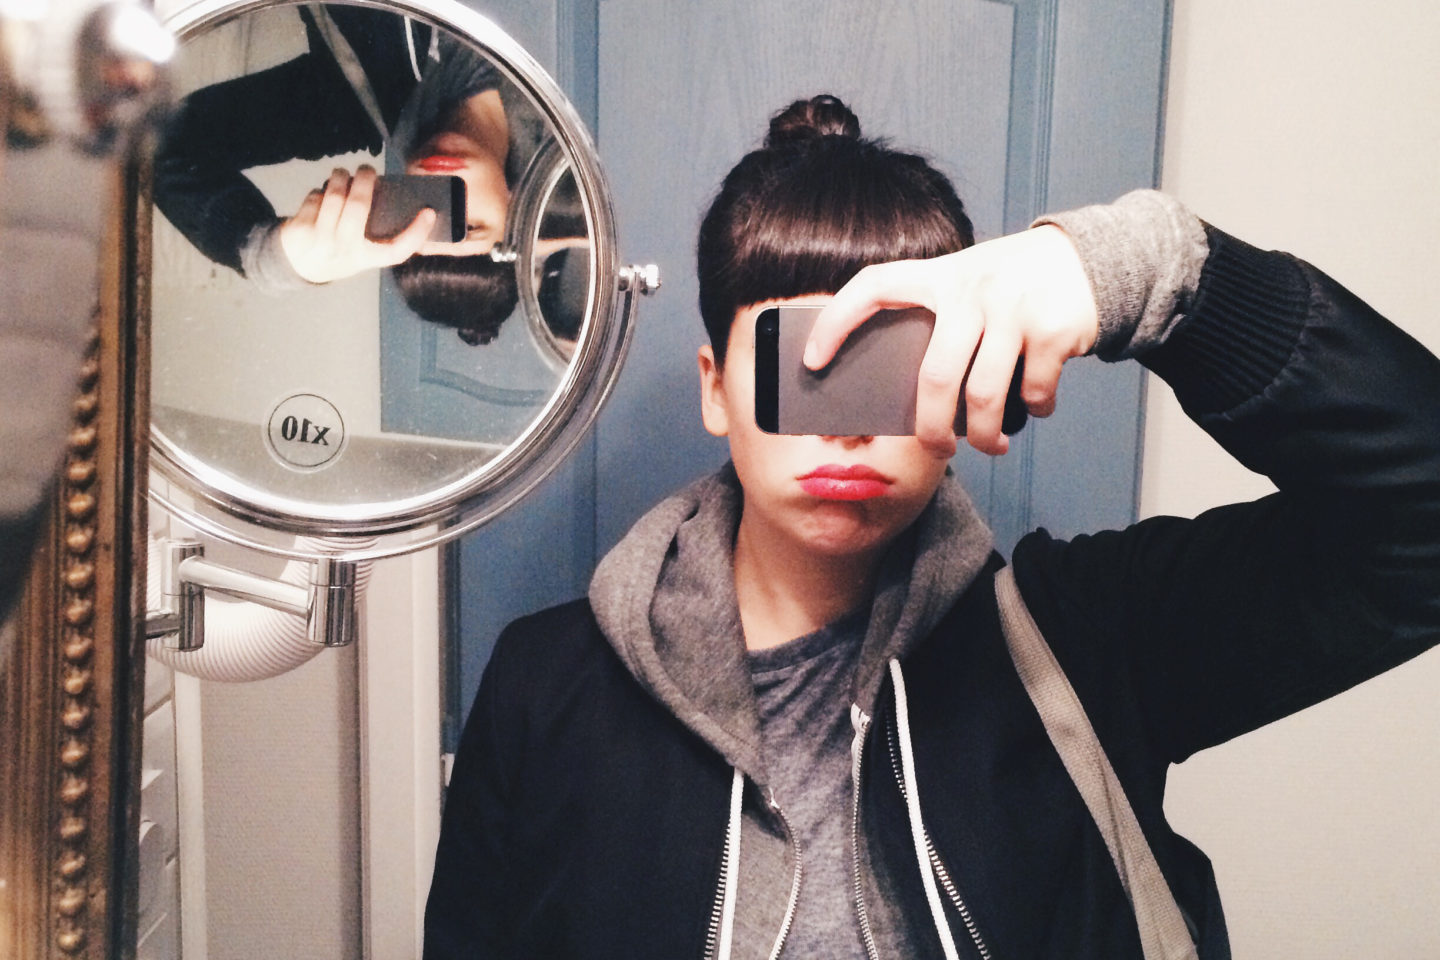 Everything You Need to Know About Body Dysmorphic Disorder